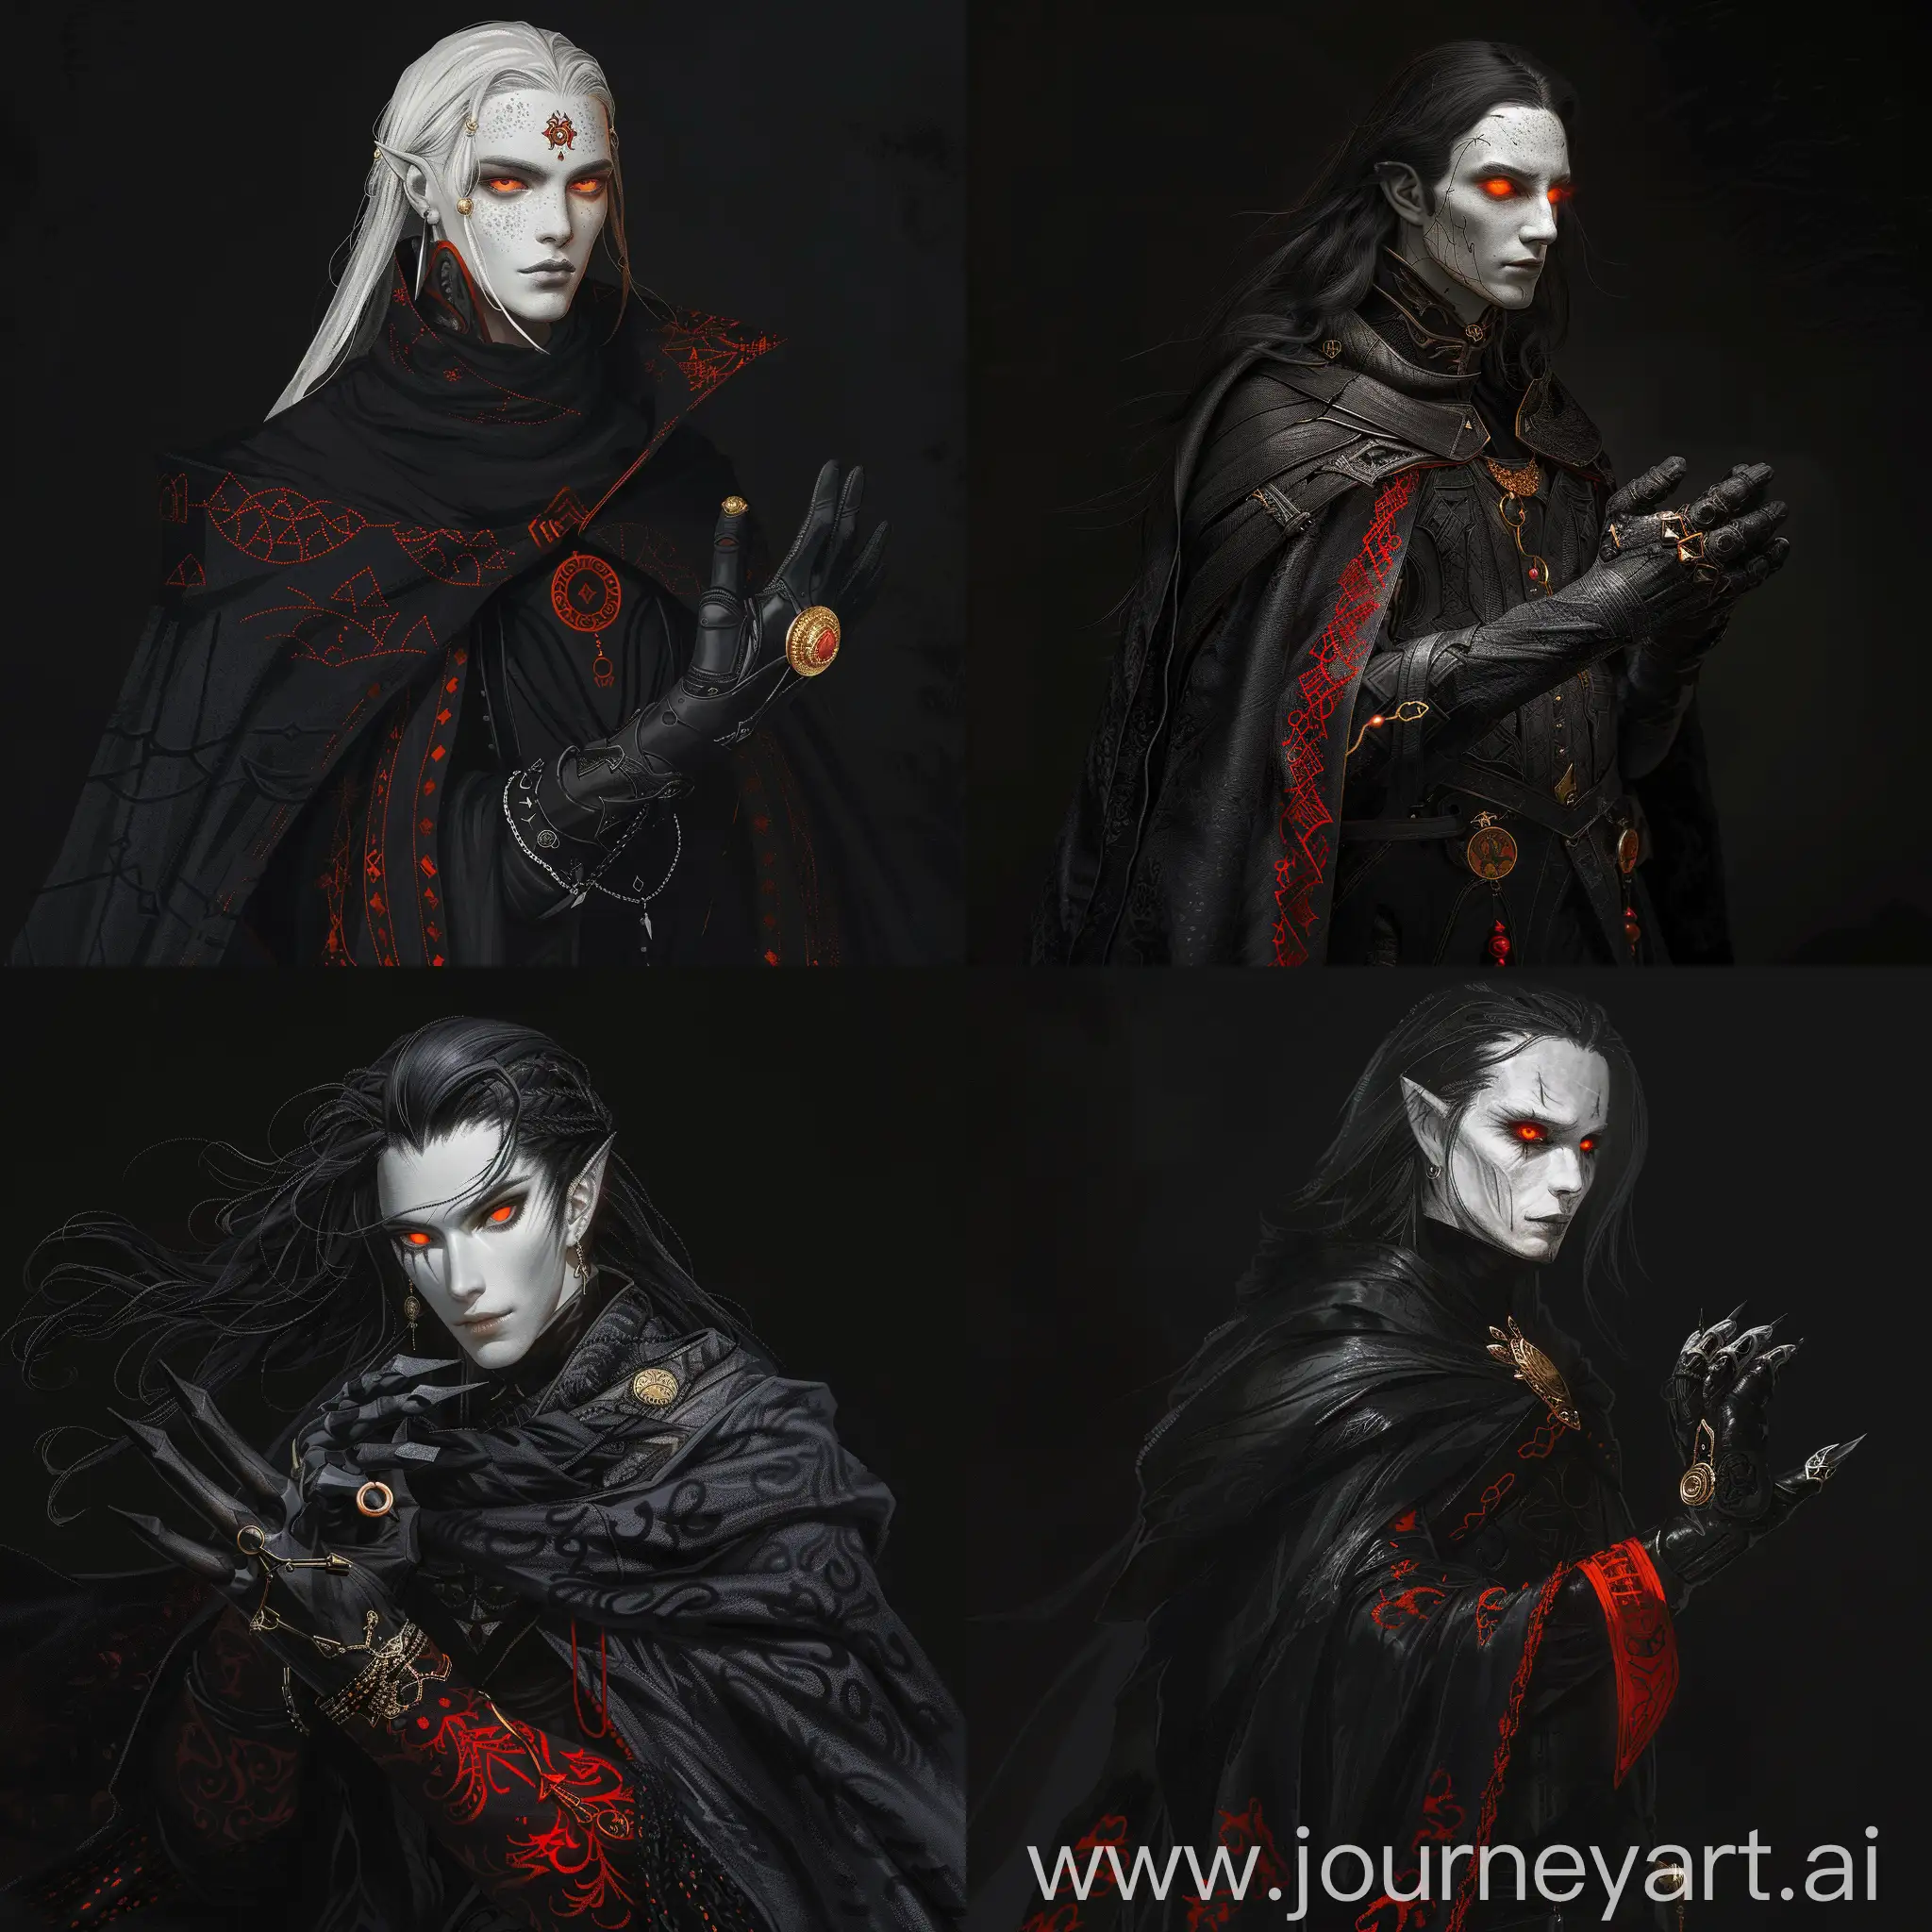 dnd white pale skin with orange eyes,long black hair,black cape with black clothes and red patterns on his clothes,wearing a black glove with a golden ring on glove.background is dark black.